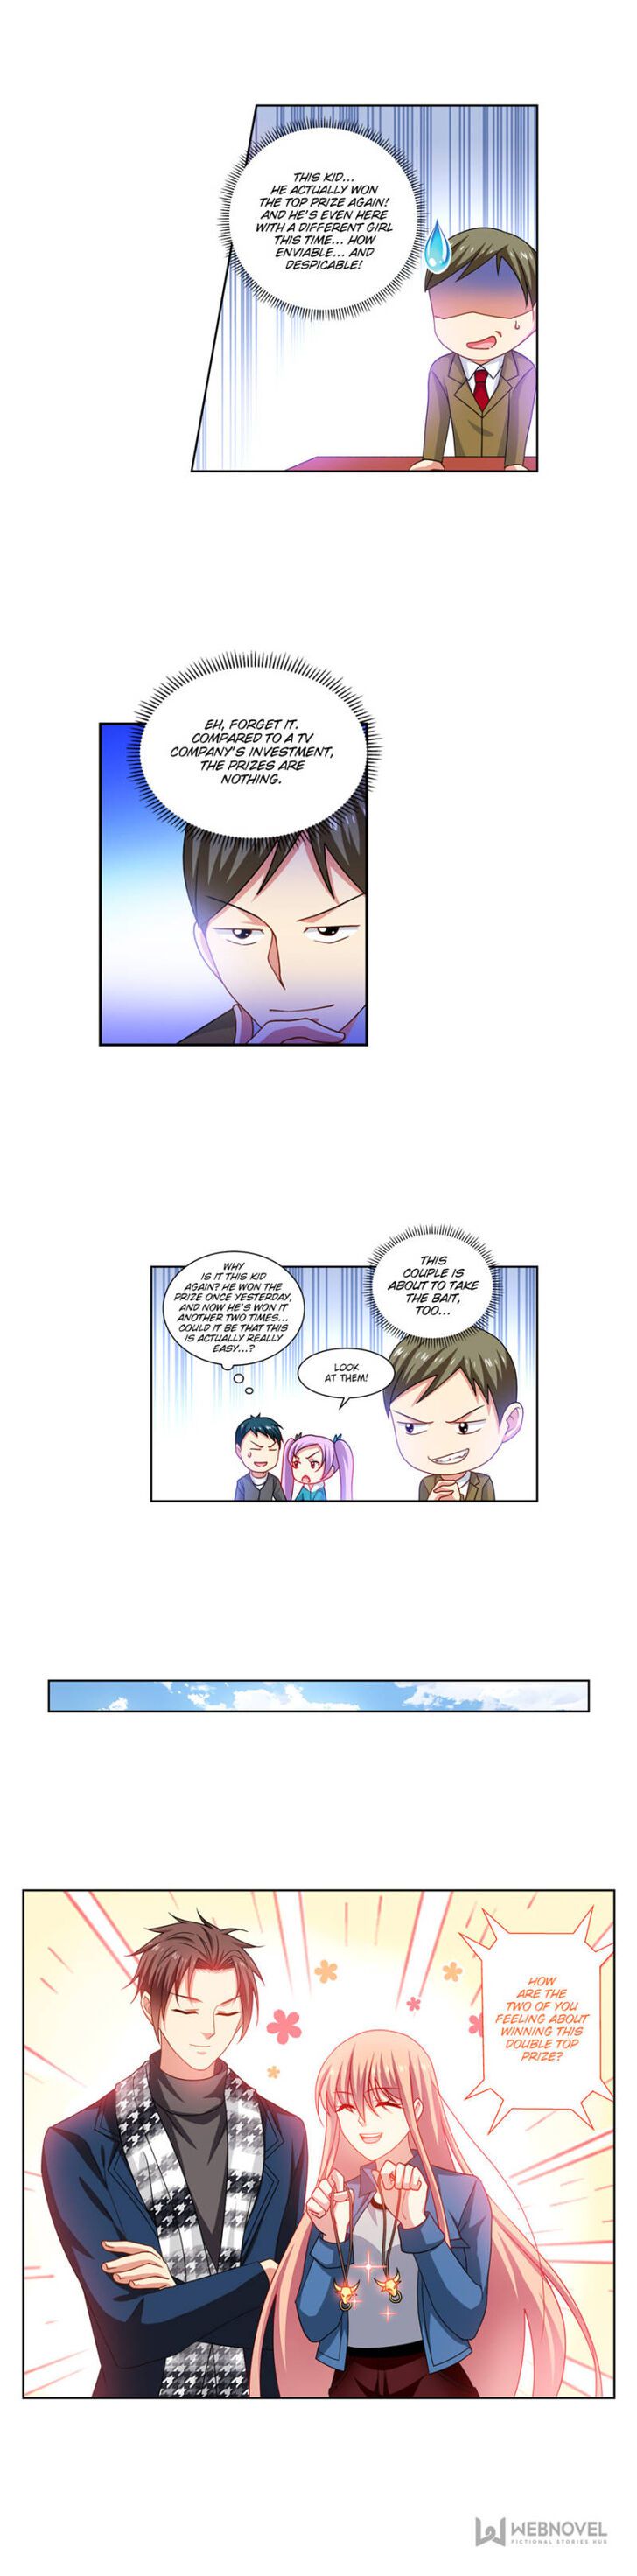 So Pure, So Flirtatious ( Very Pure ) Chapter 273 page 4